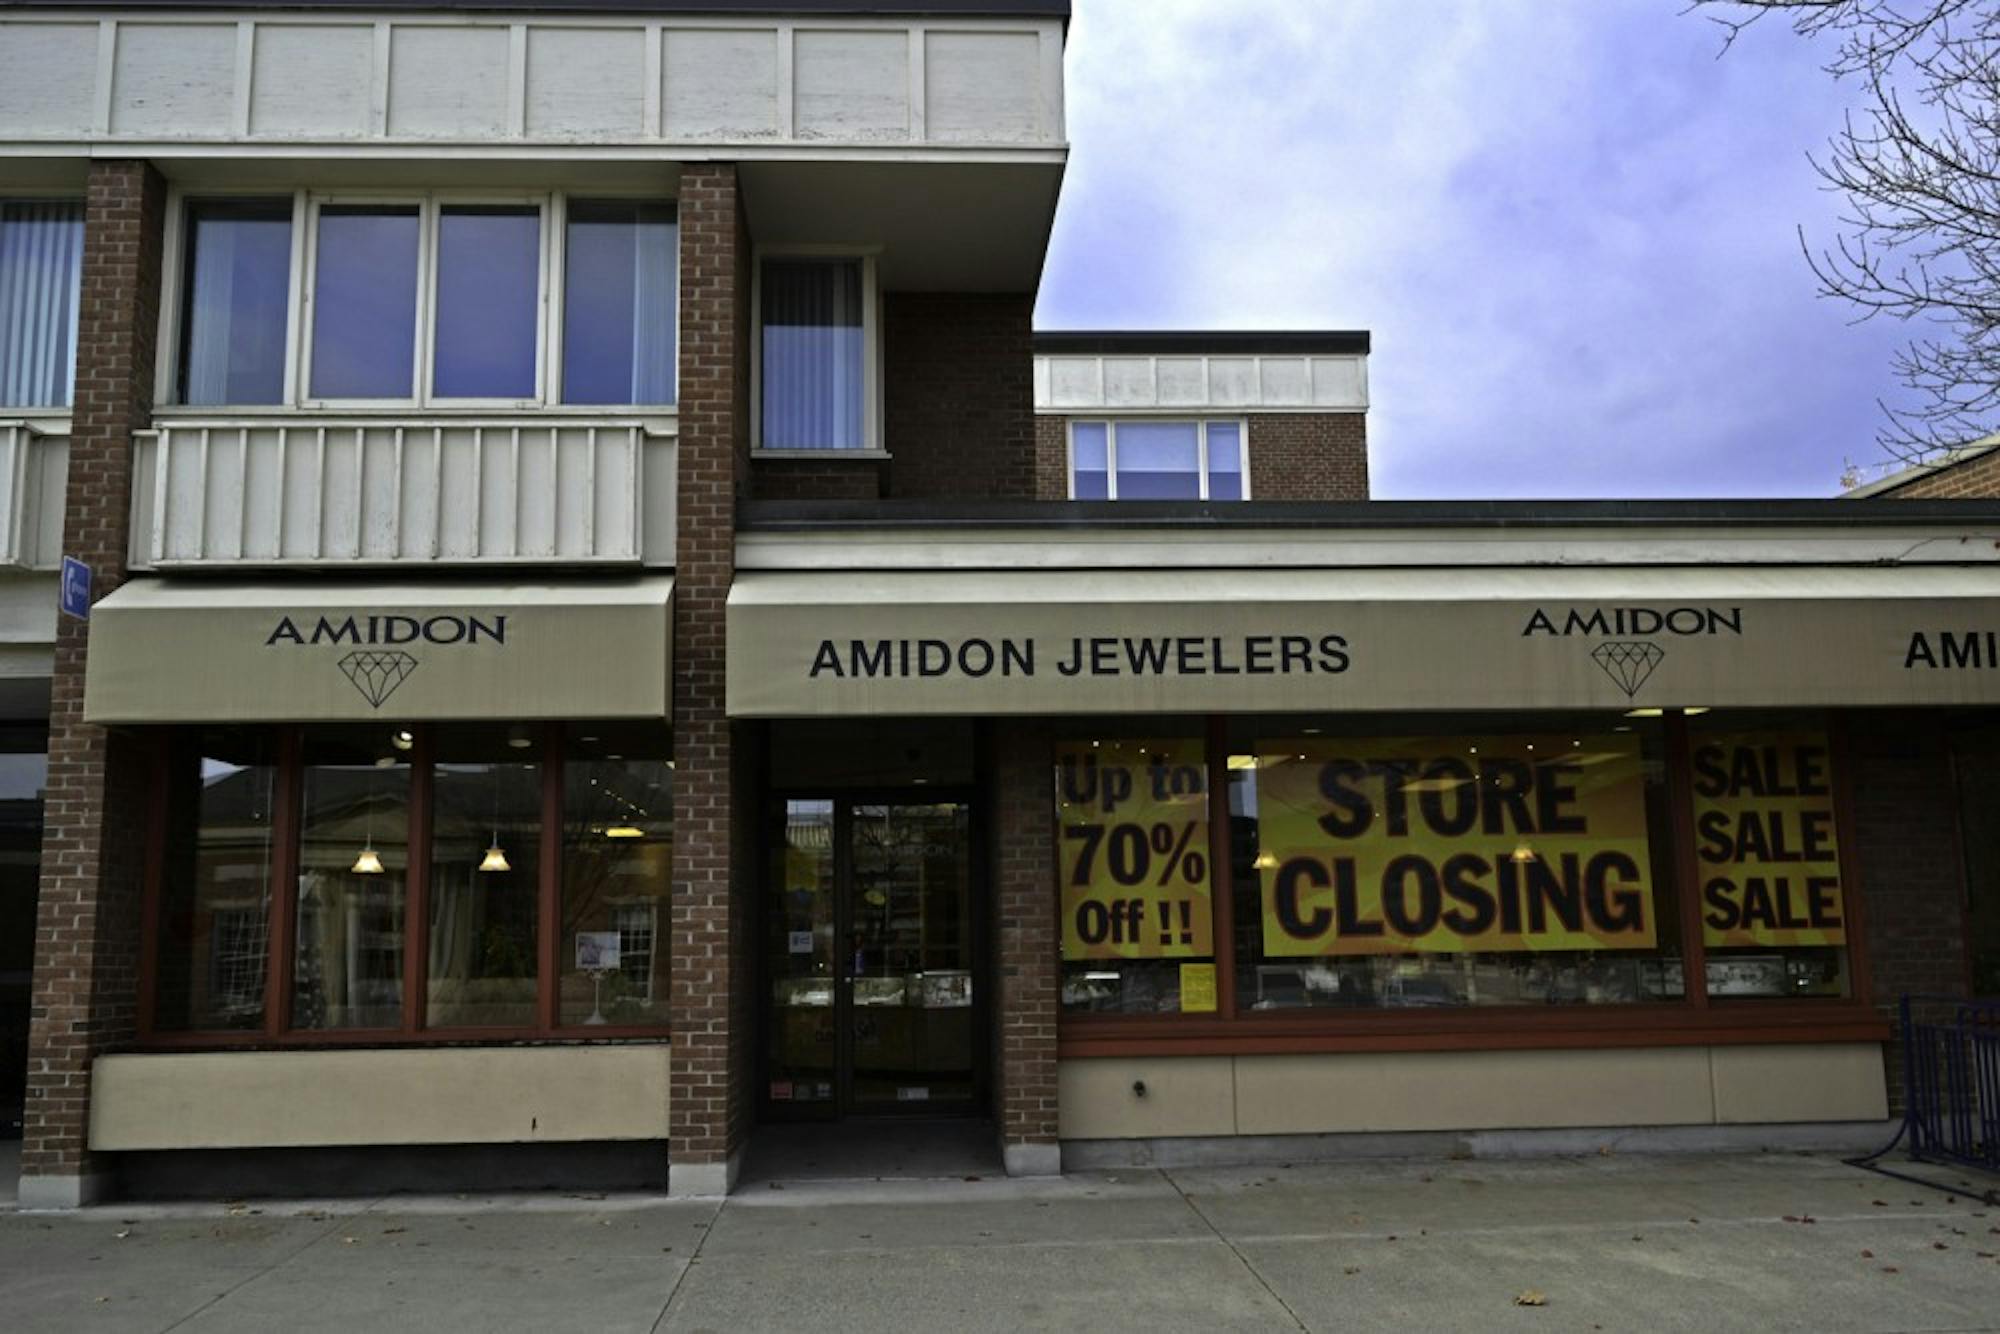 Hanover store employees will continue to work for other branches of Amidon Jewelers following the store’s closure.